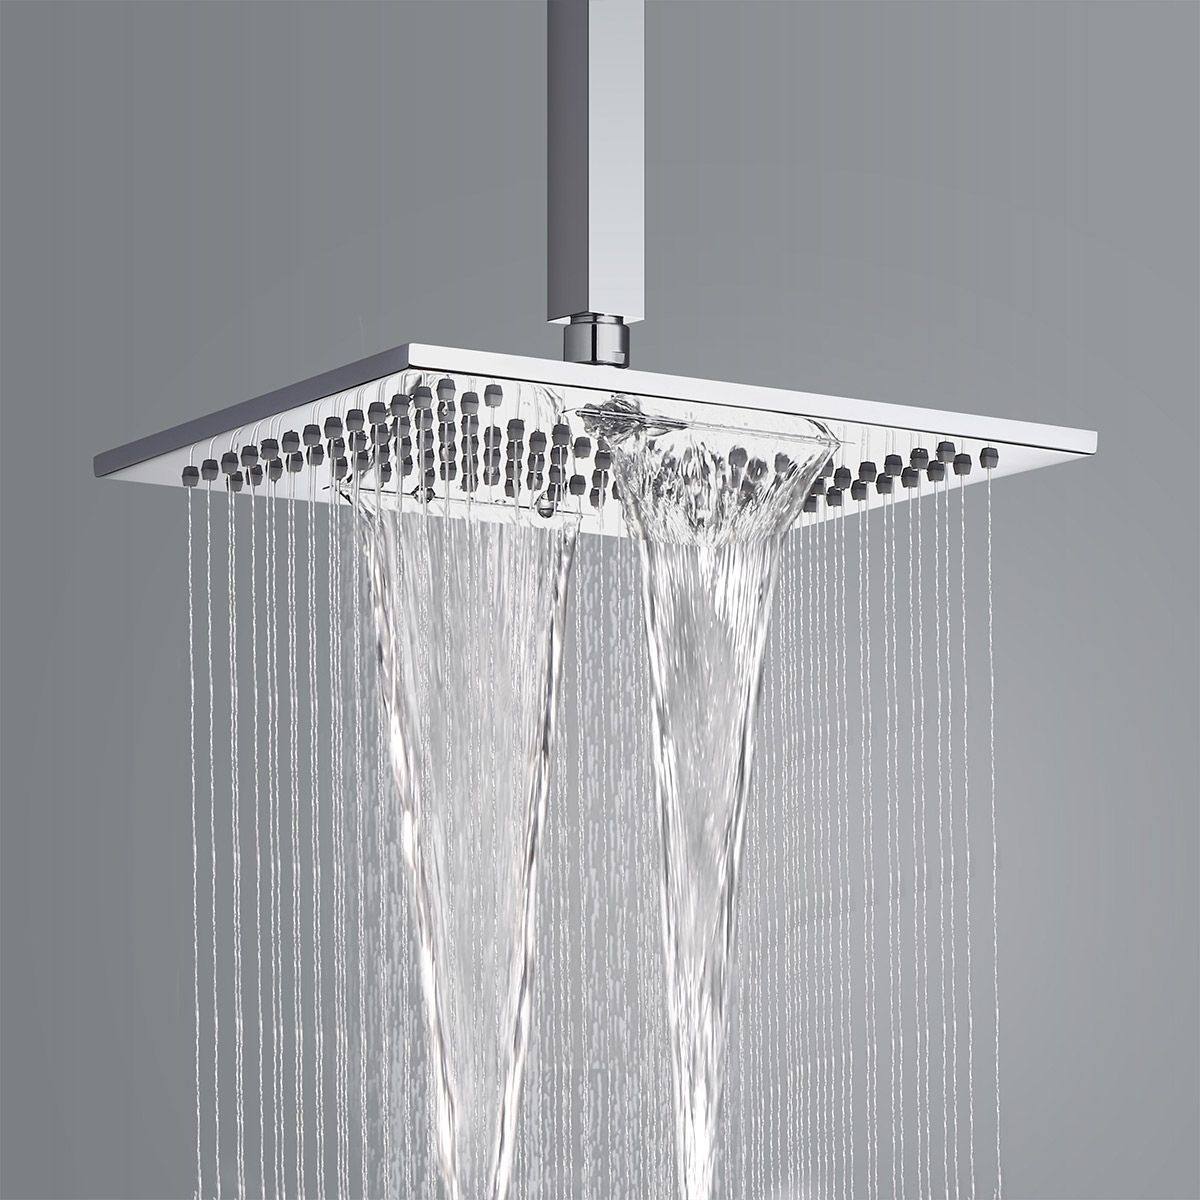 10 Waterfall Square Rain Shower Head Two Functional In Polished Chrome Solid Brass